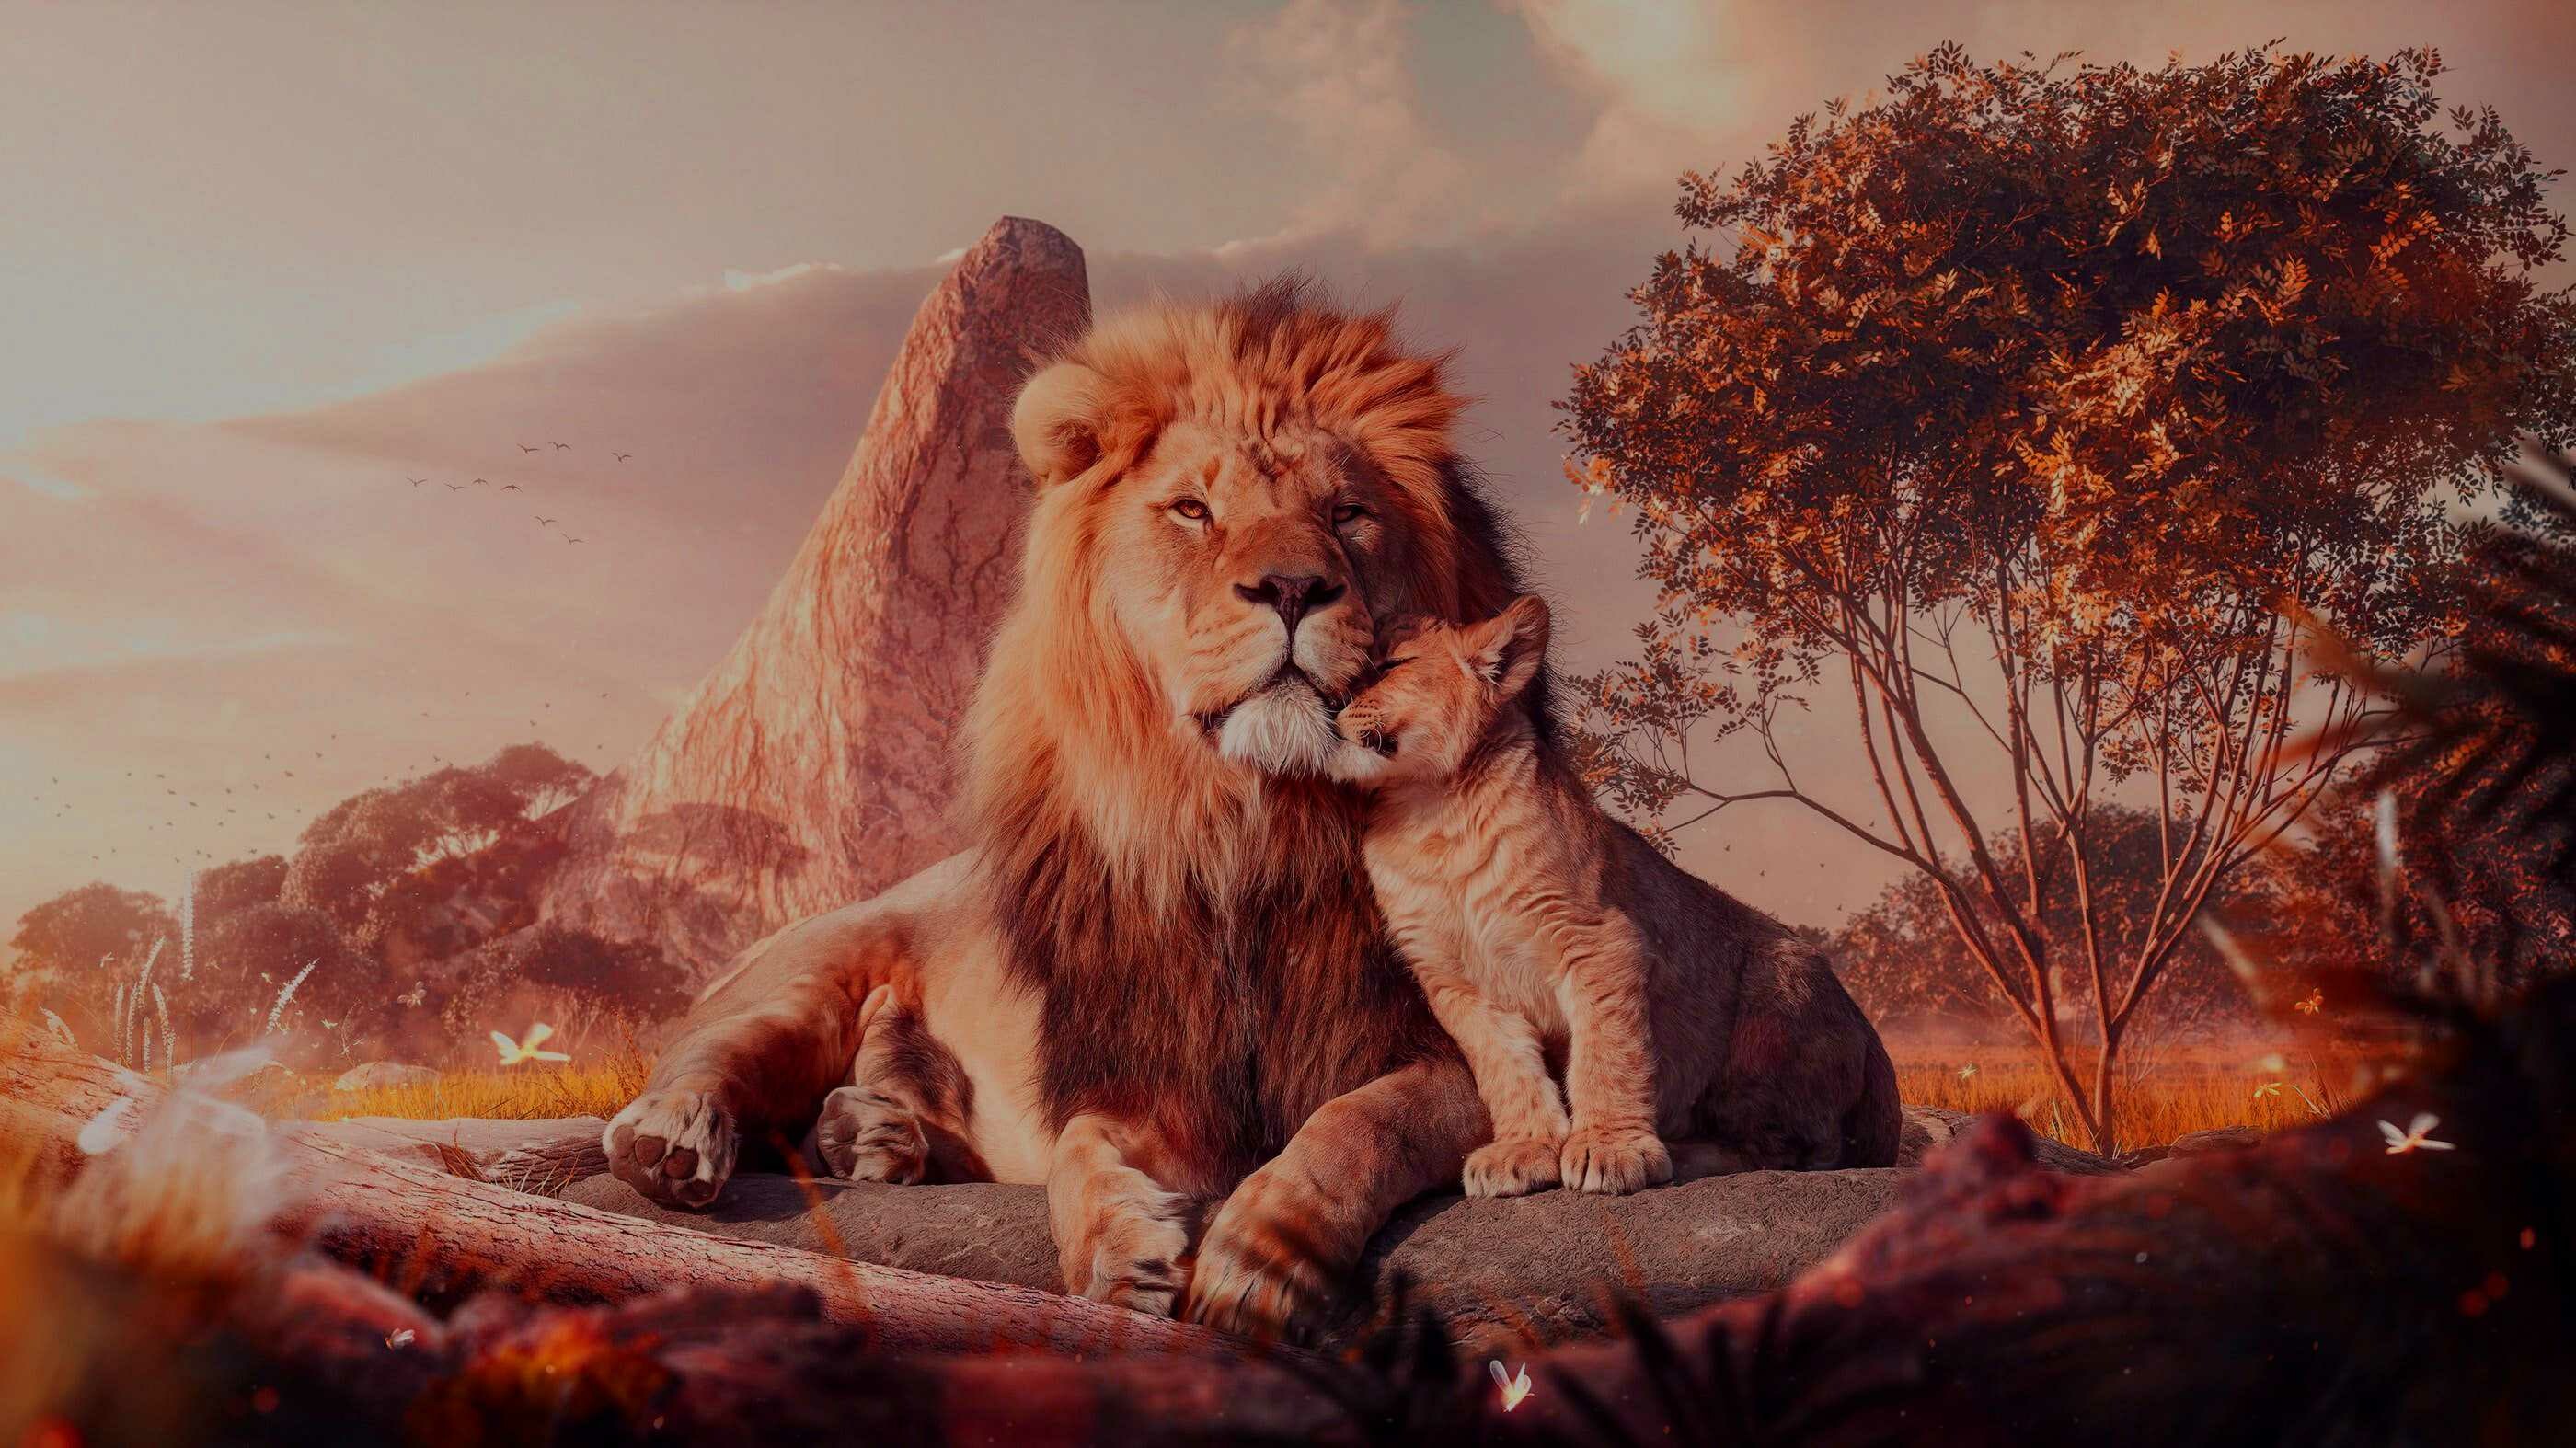 The Lion King: This Disney animated feature follows the adventures of the young lion Simba. 2800x1580 HD Background.